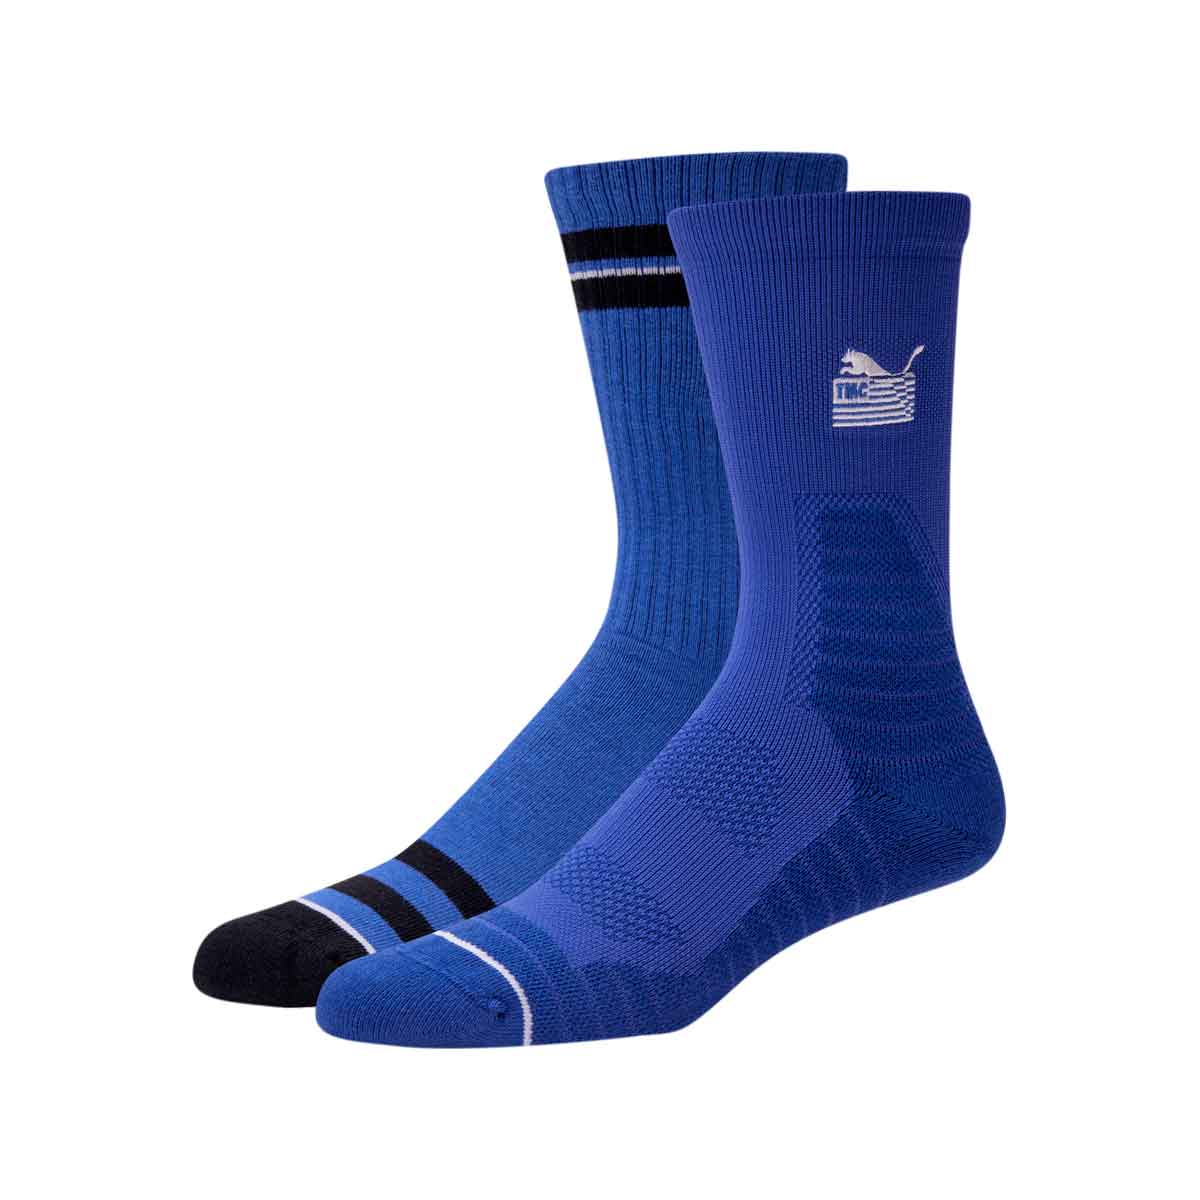 PUMA x TMC Everyday Hussle Collection Socks - Royal/White (2 pack)